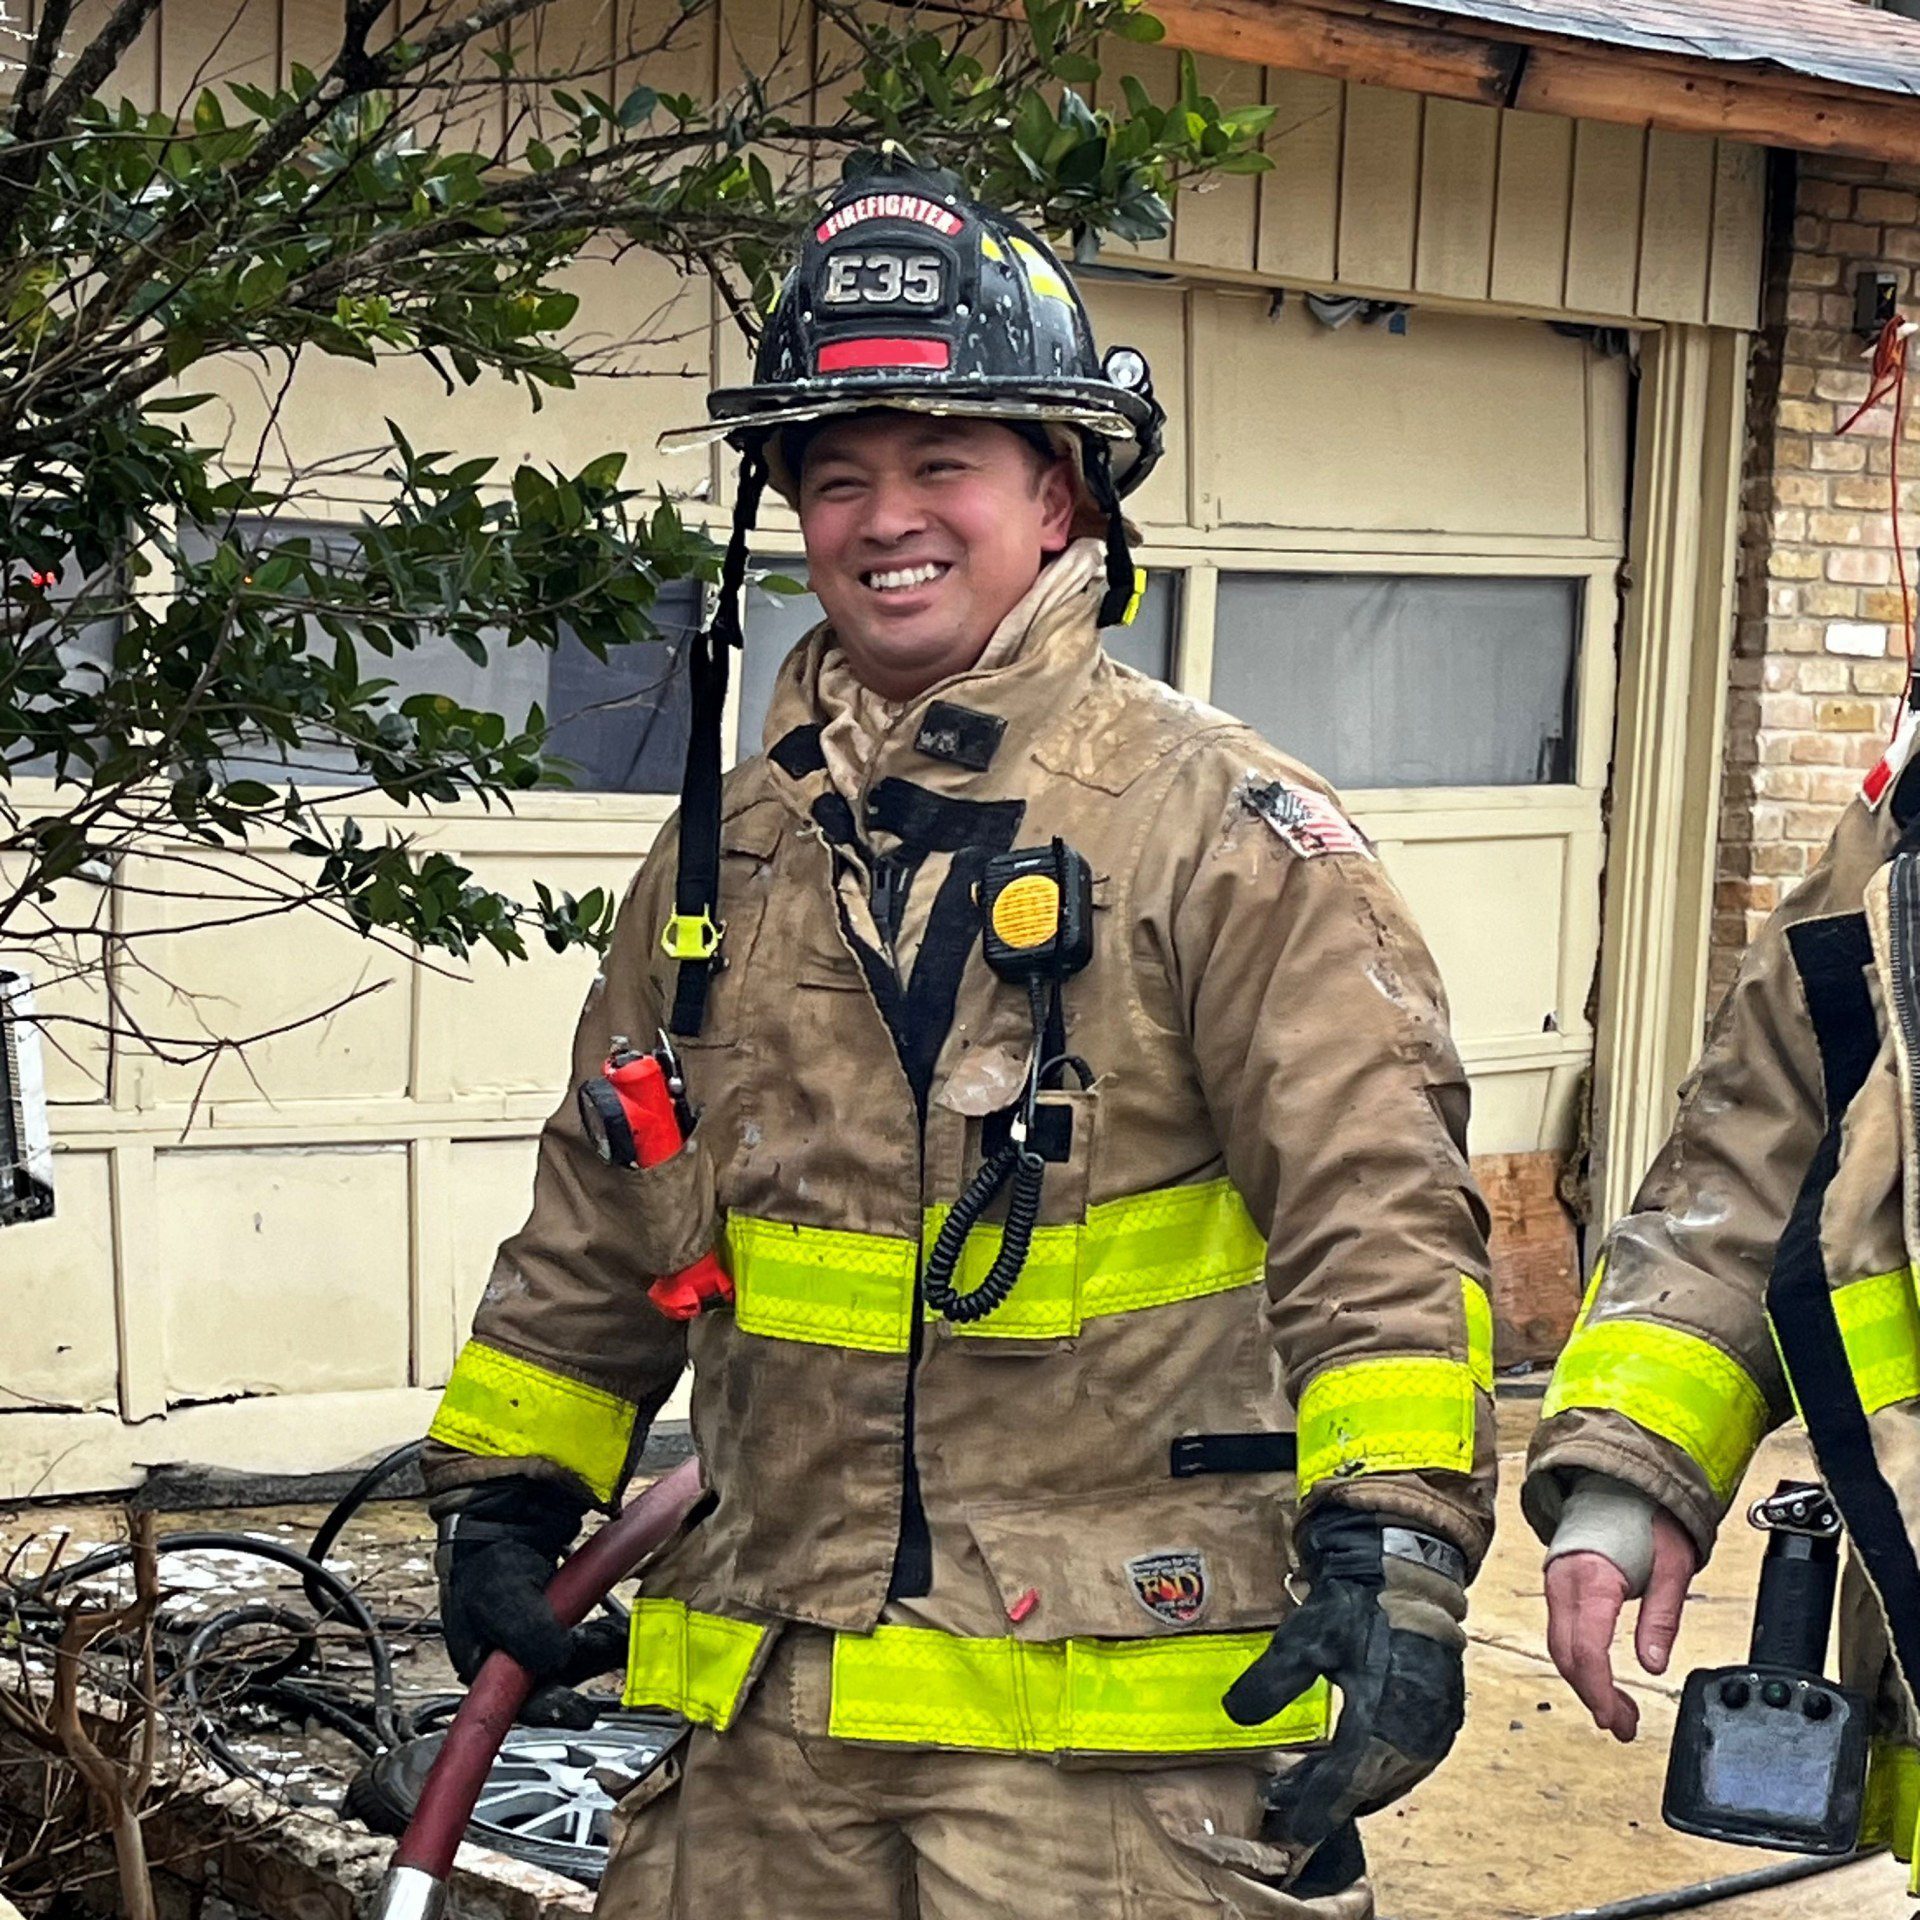 Smiling fire fighter